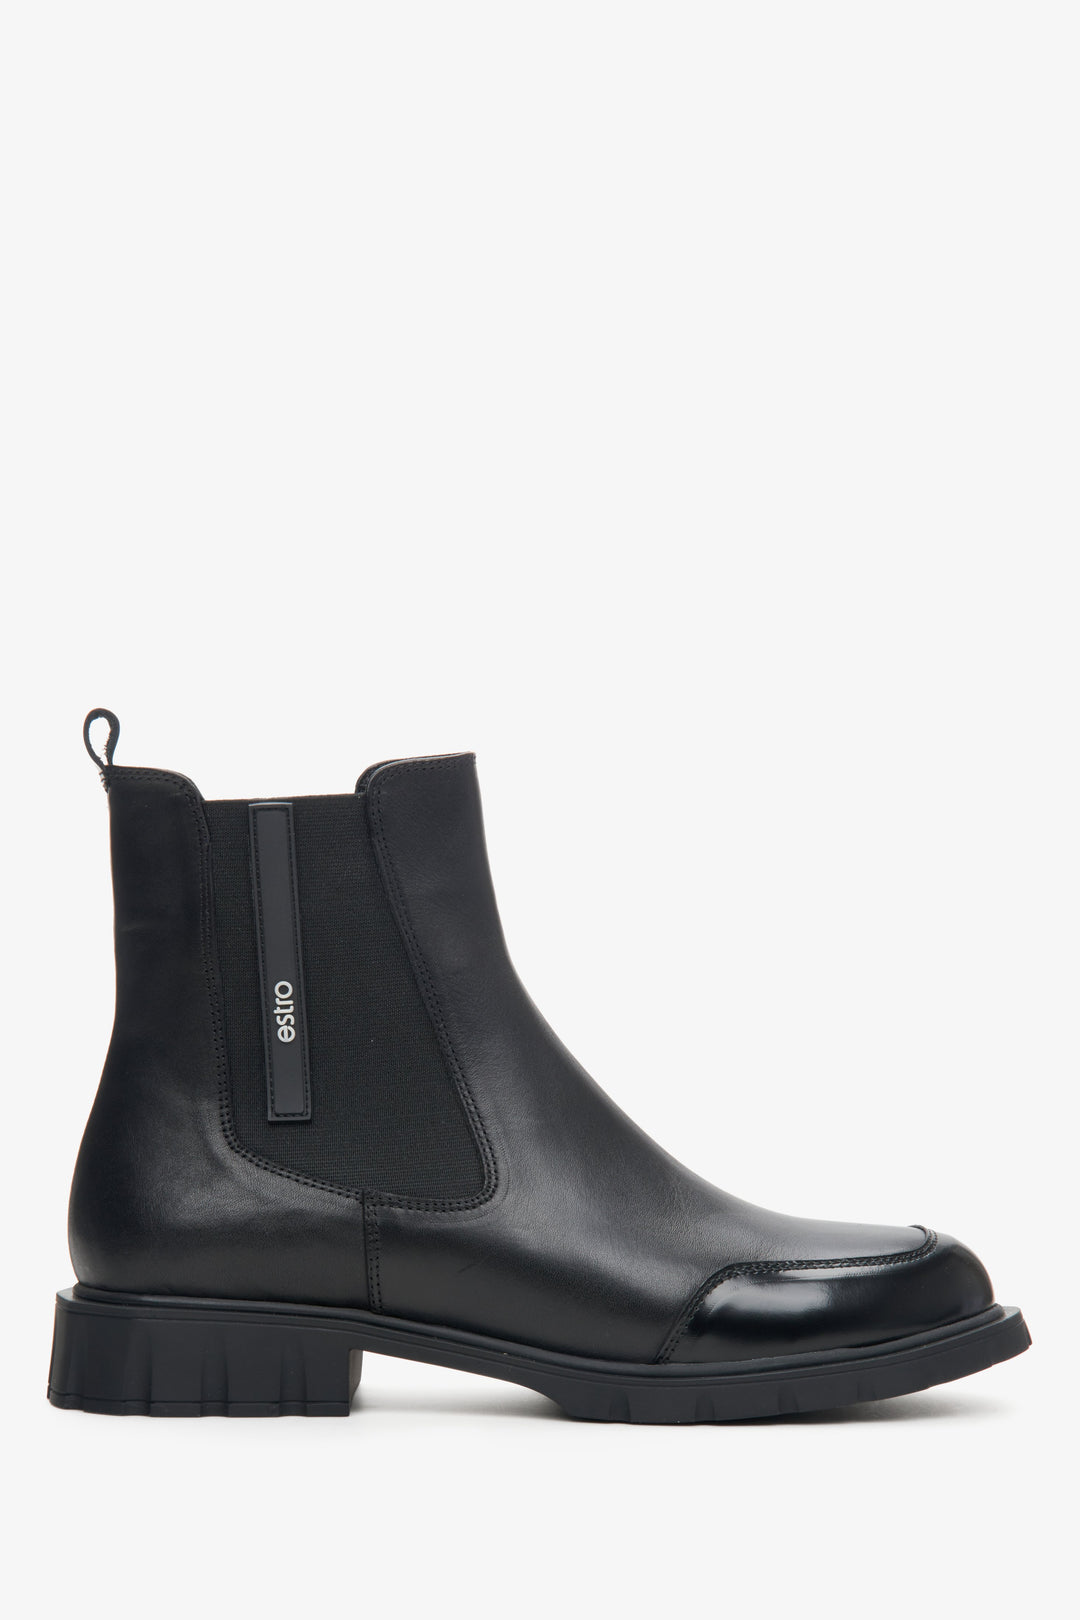 Women's Black Chelsea Boots made of Genuine Leather with Patent Toe Cap Estro ER00113866.